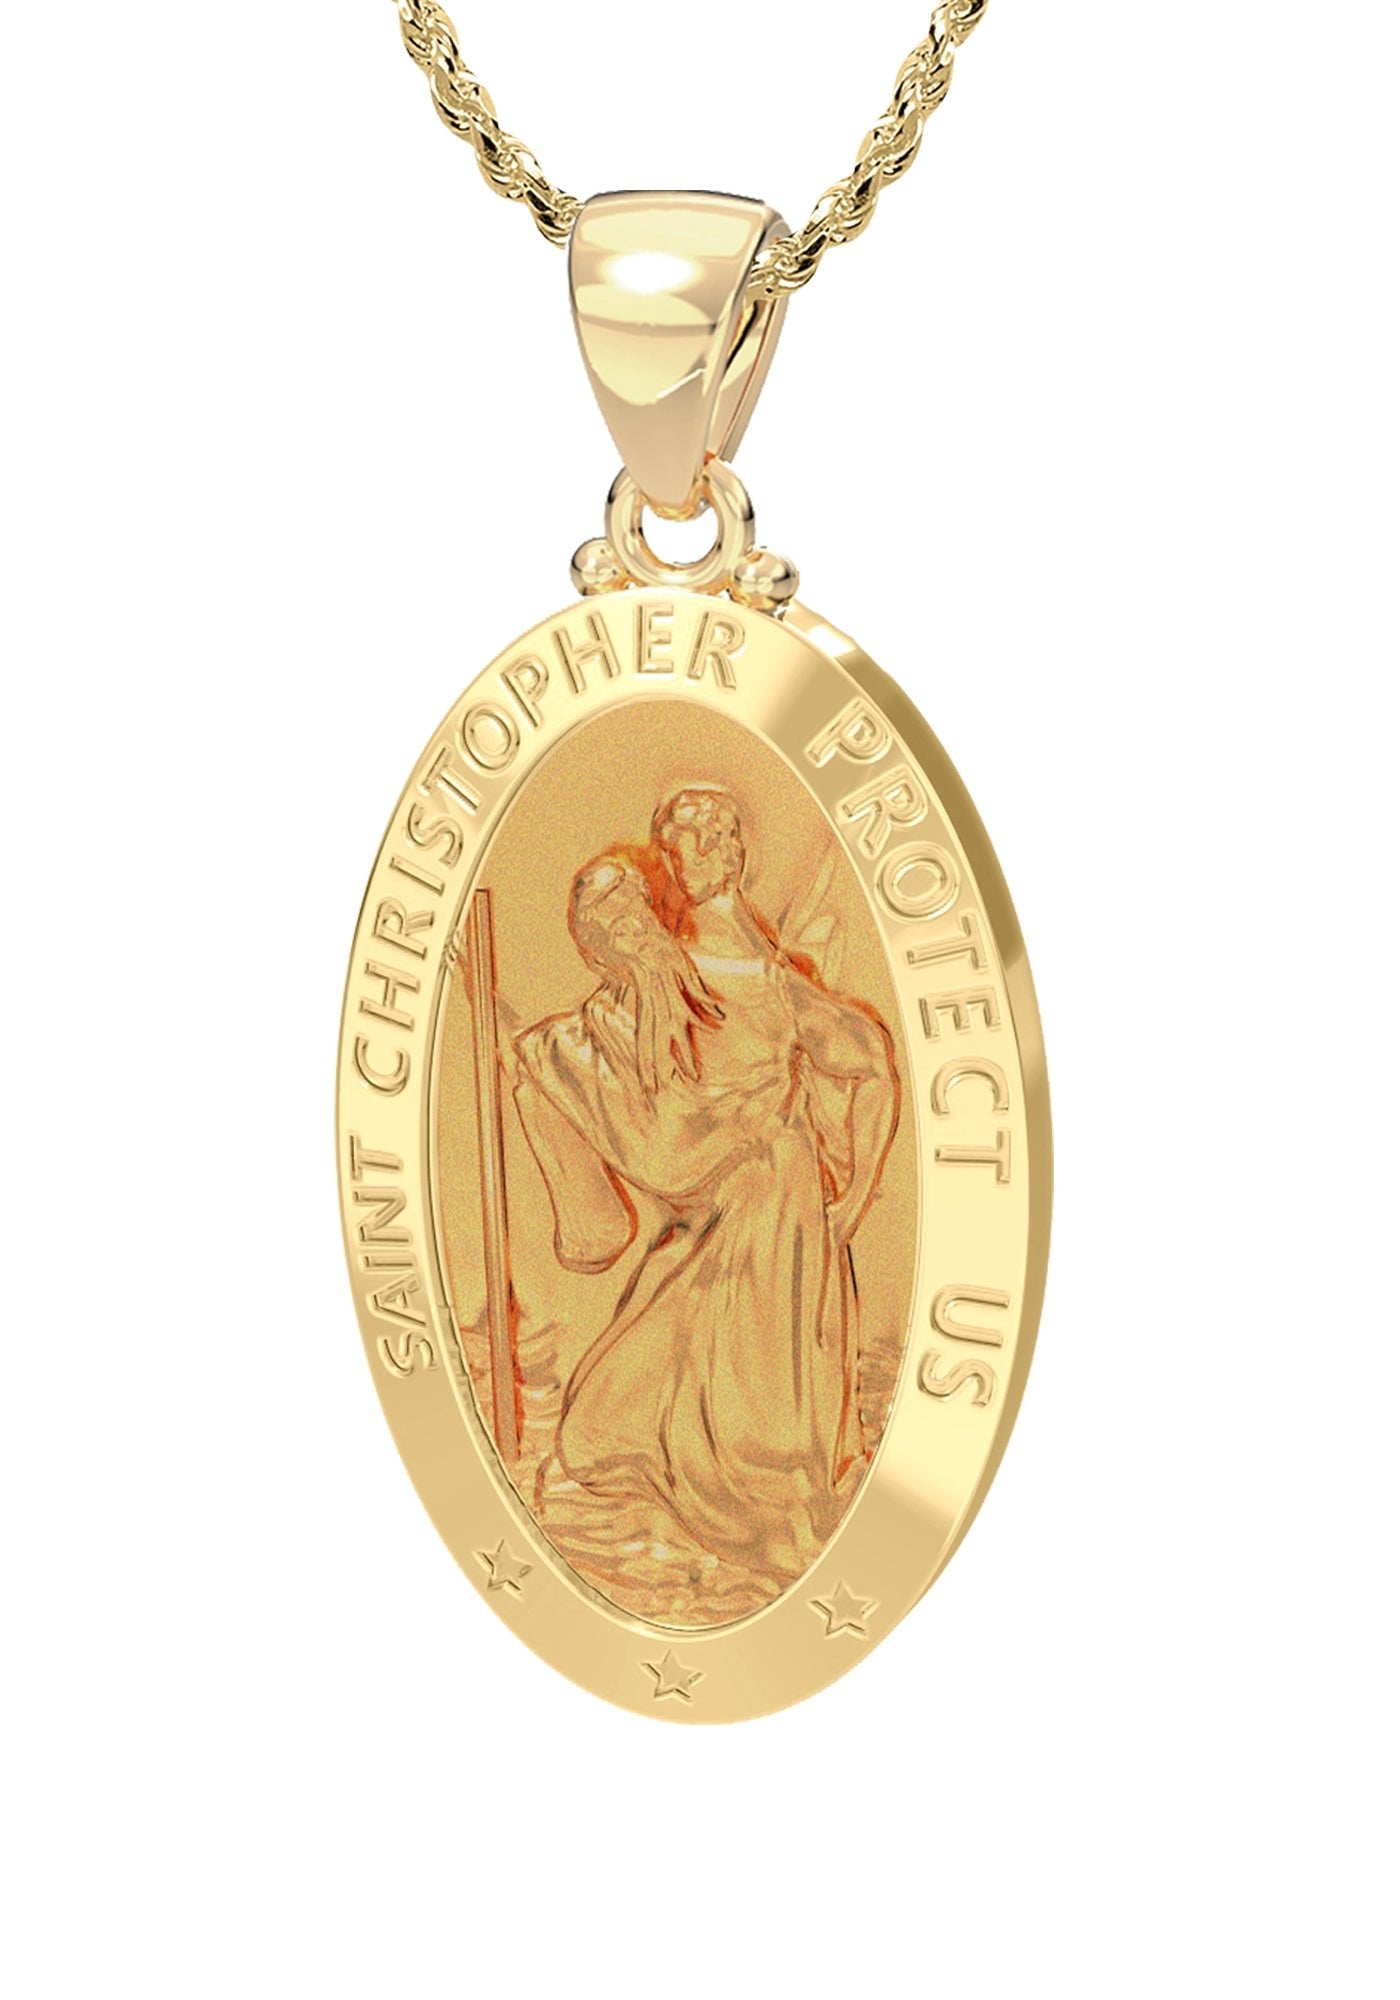 Ladies 14K Yellow Gold Saint Christopher Polished Finish Hollow Pendant Necklace, 26mm - US Jewels